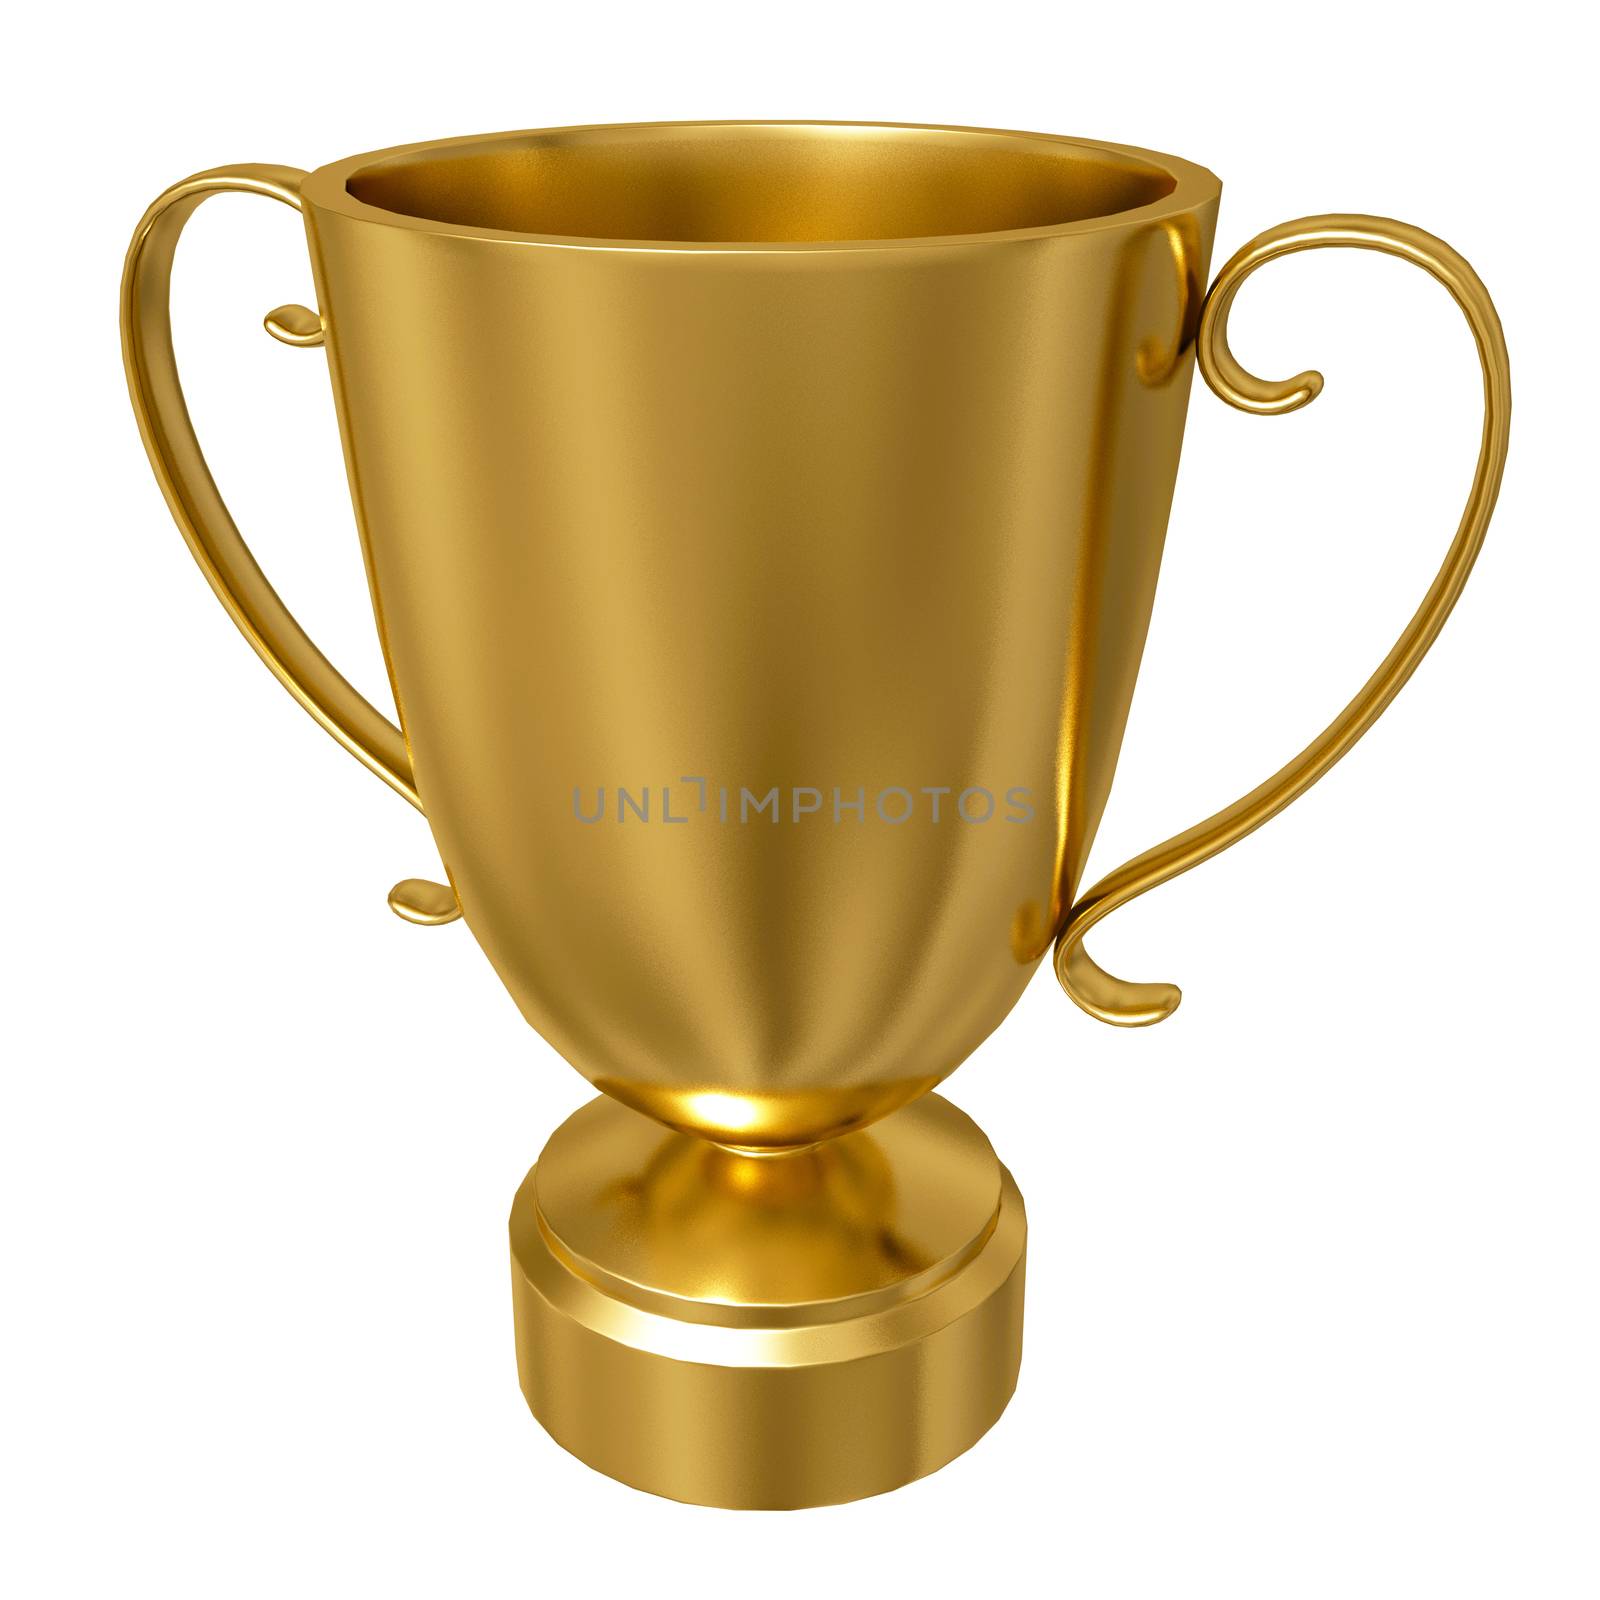 Gold trophy cup isolated against a white background
